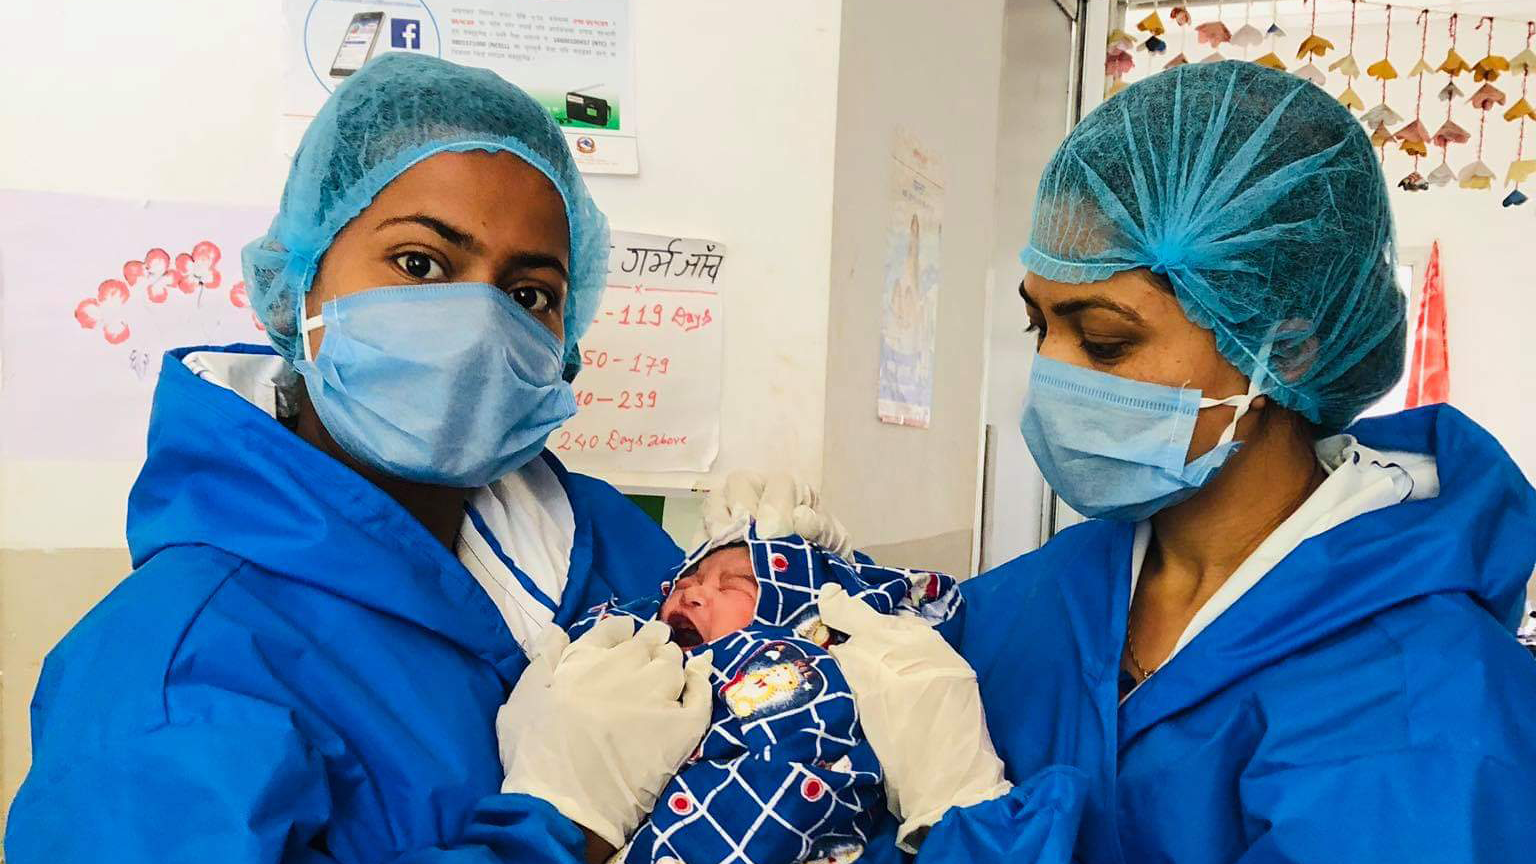 Credit: One Heart Worldwide. Description: Photo shows two nursing staff with newborn after delivery.